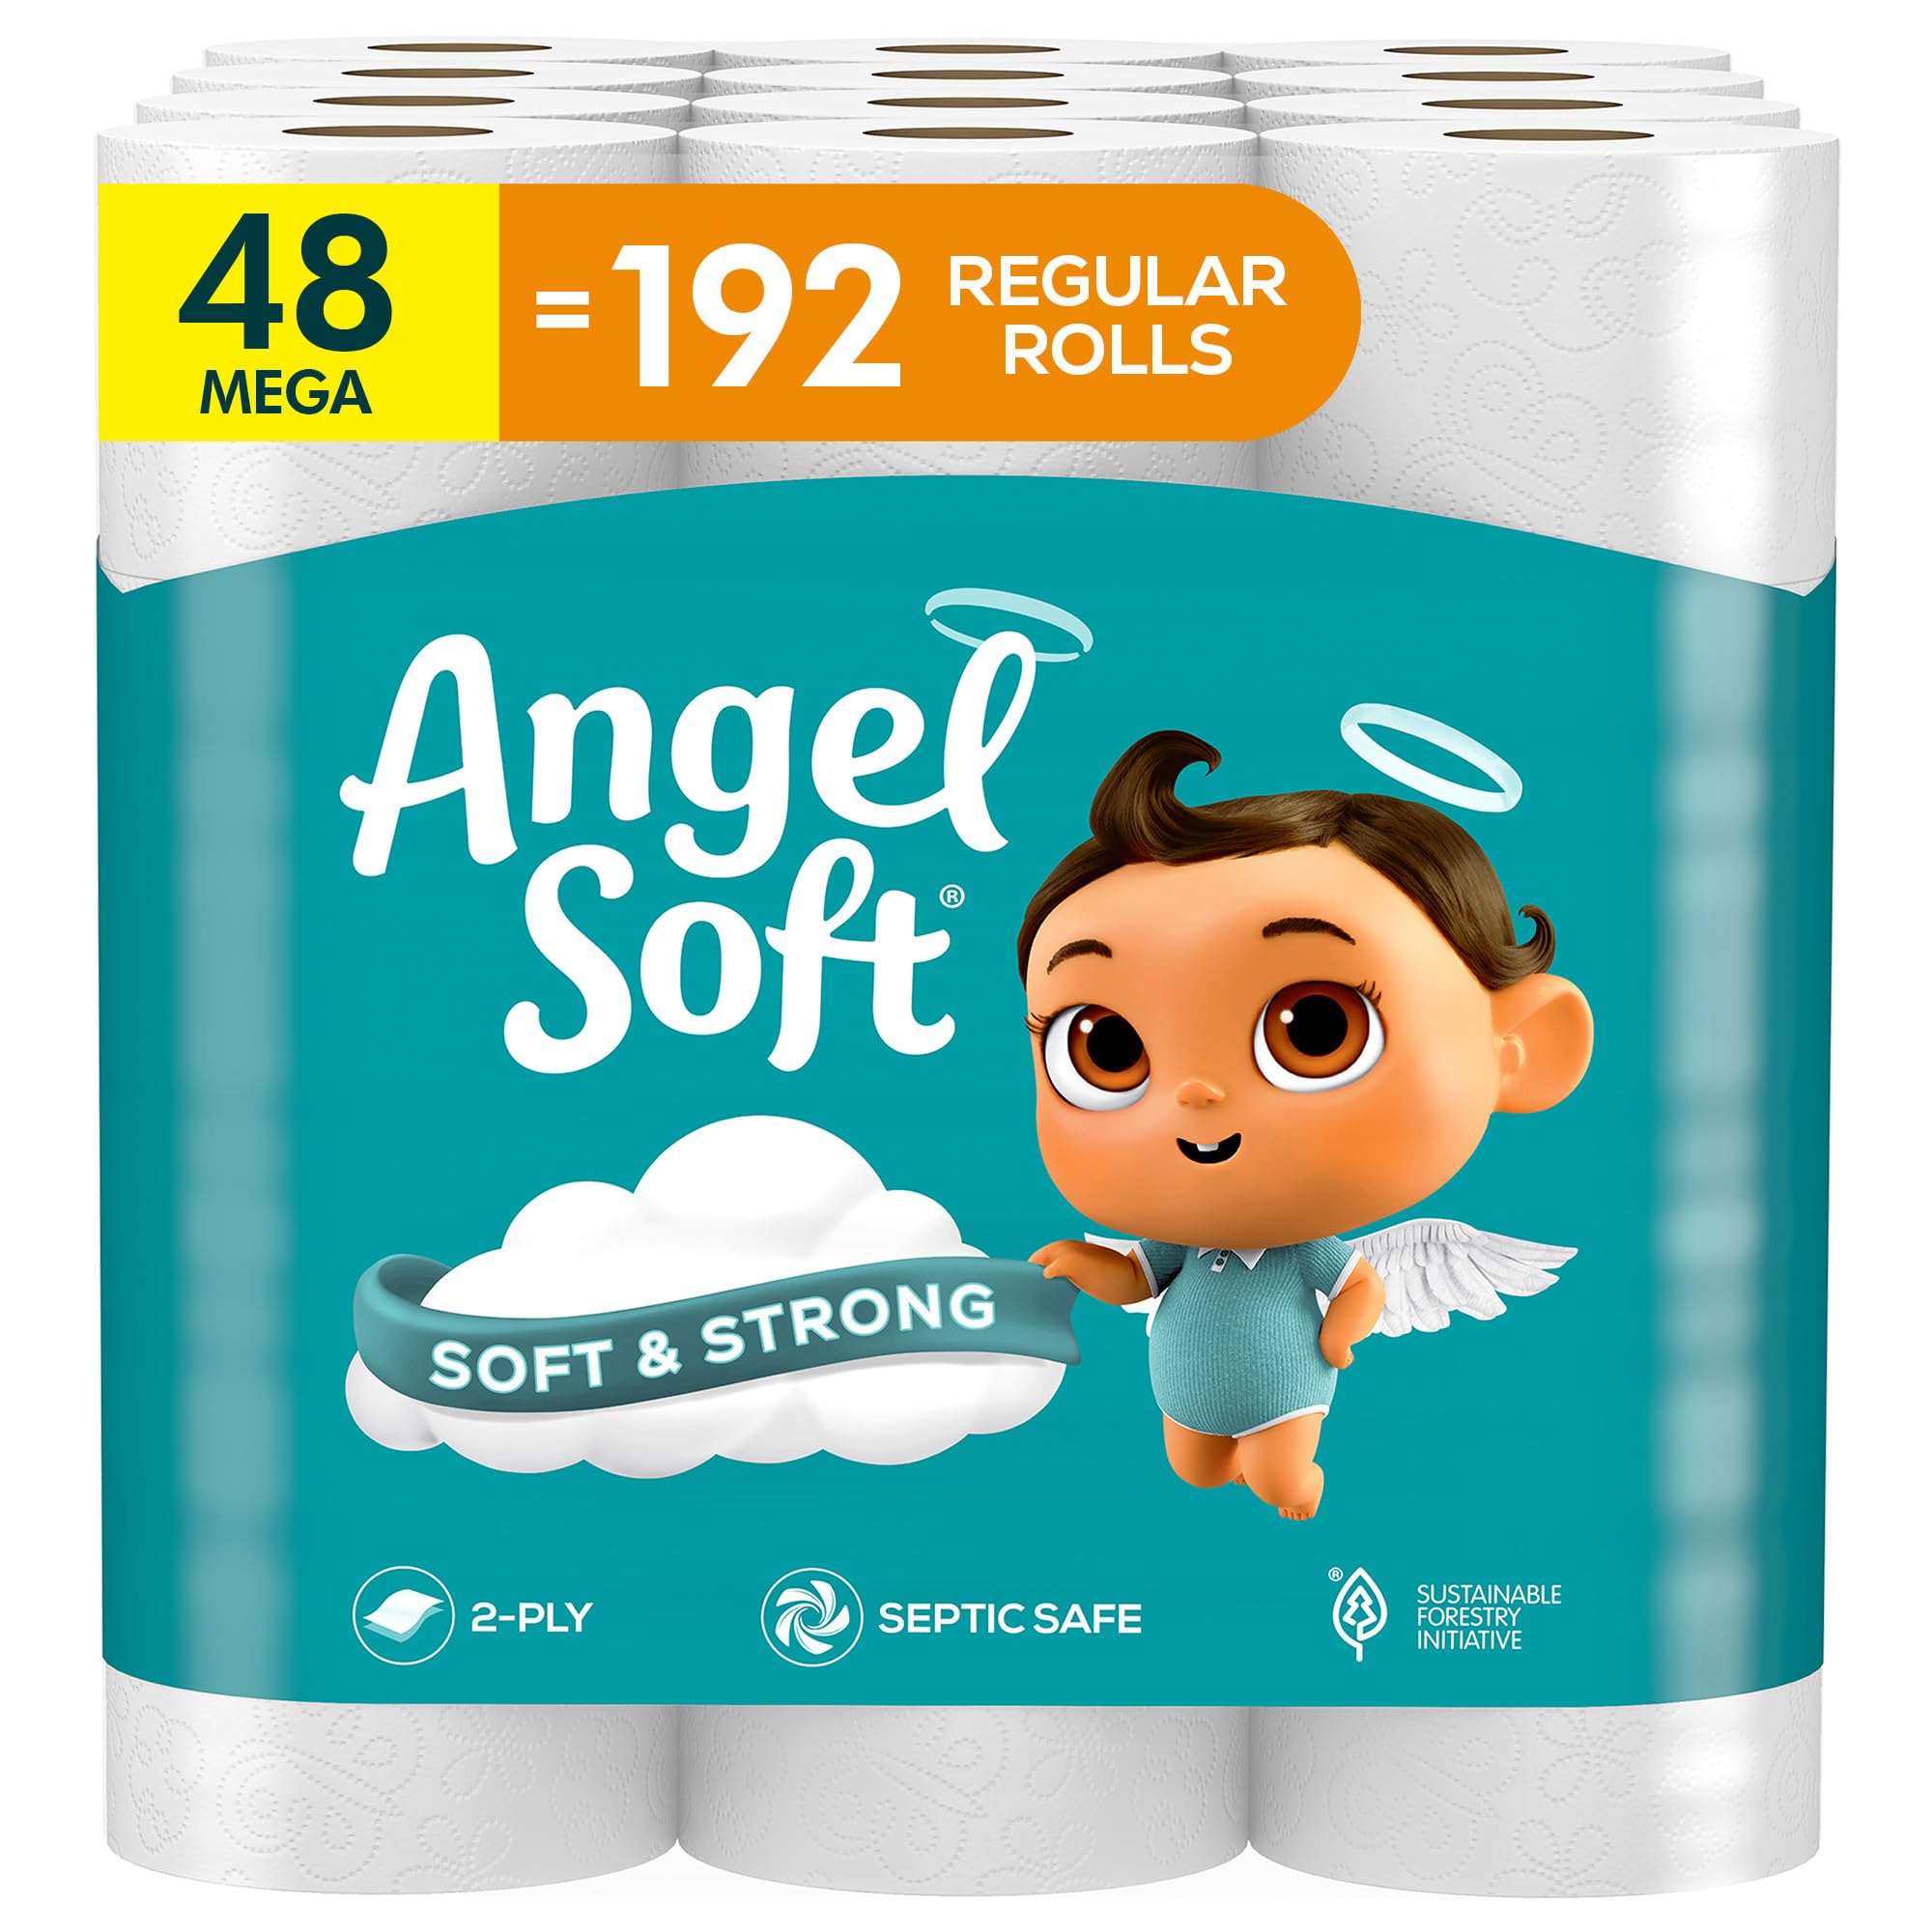 80-Count Angel Soft 2-Ply Mega Rolls Toilet Paper $54.66 + $15 Amazon Credit w/ S&S + Free shipping